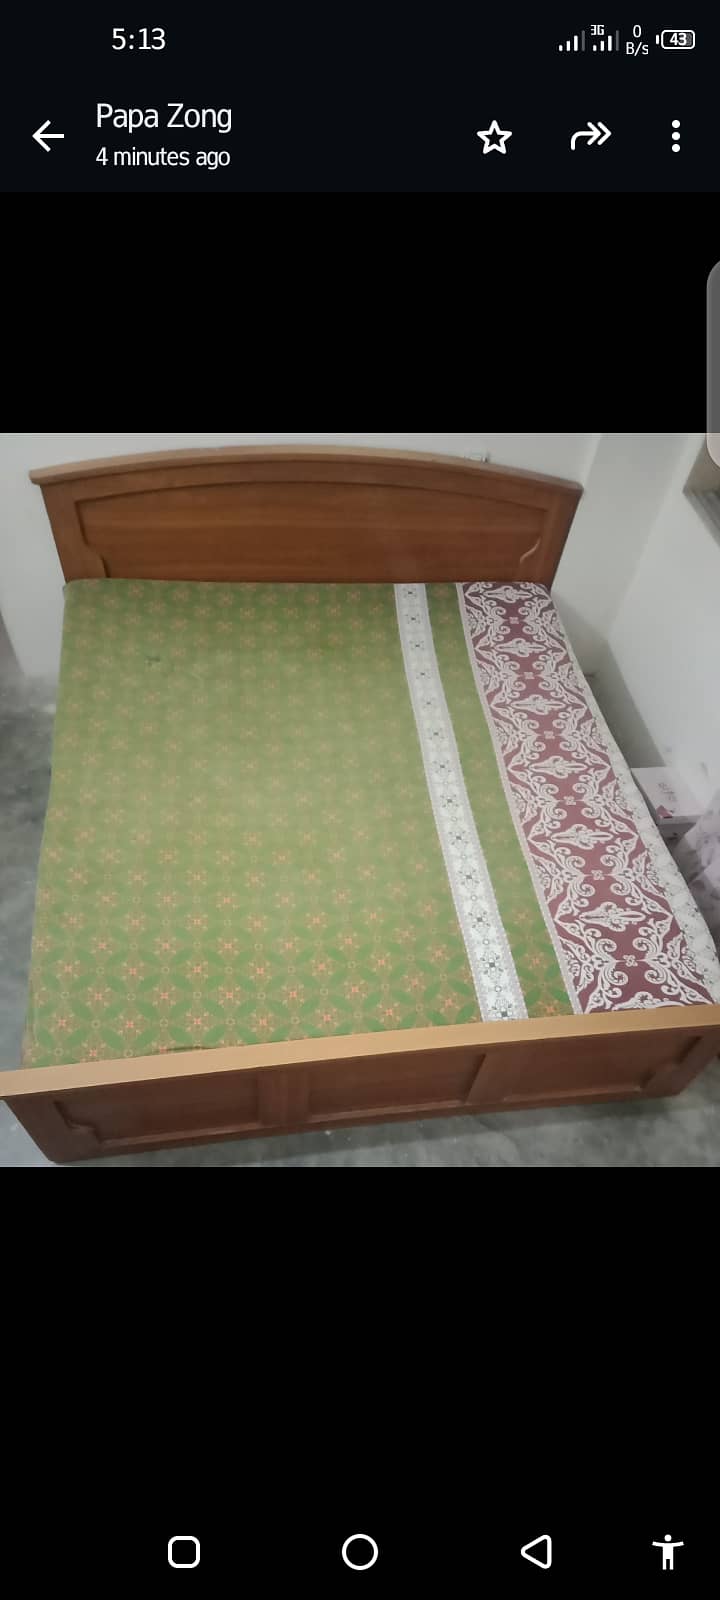 double bed selling 0